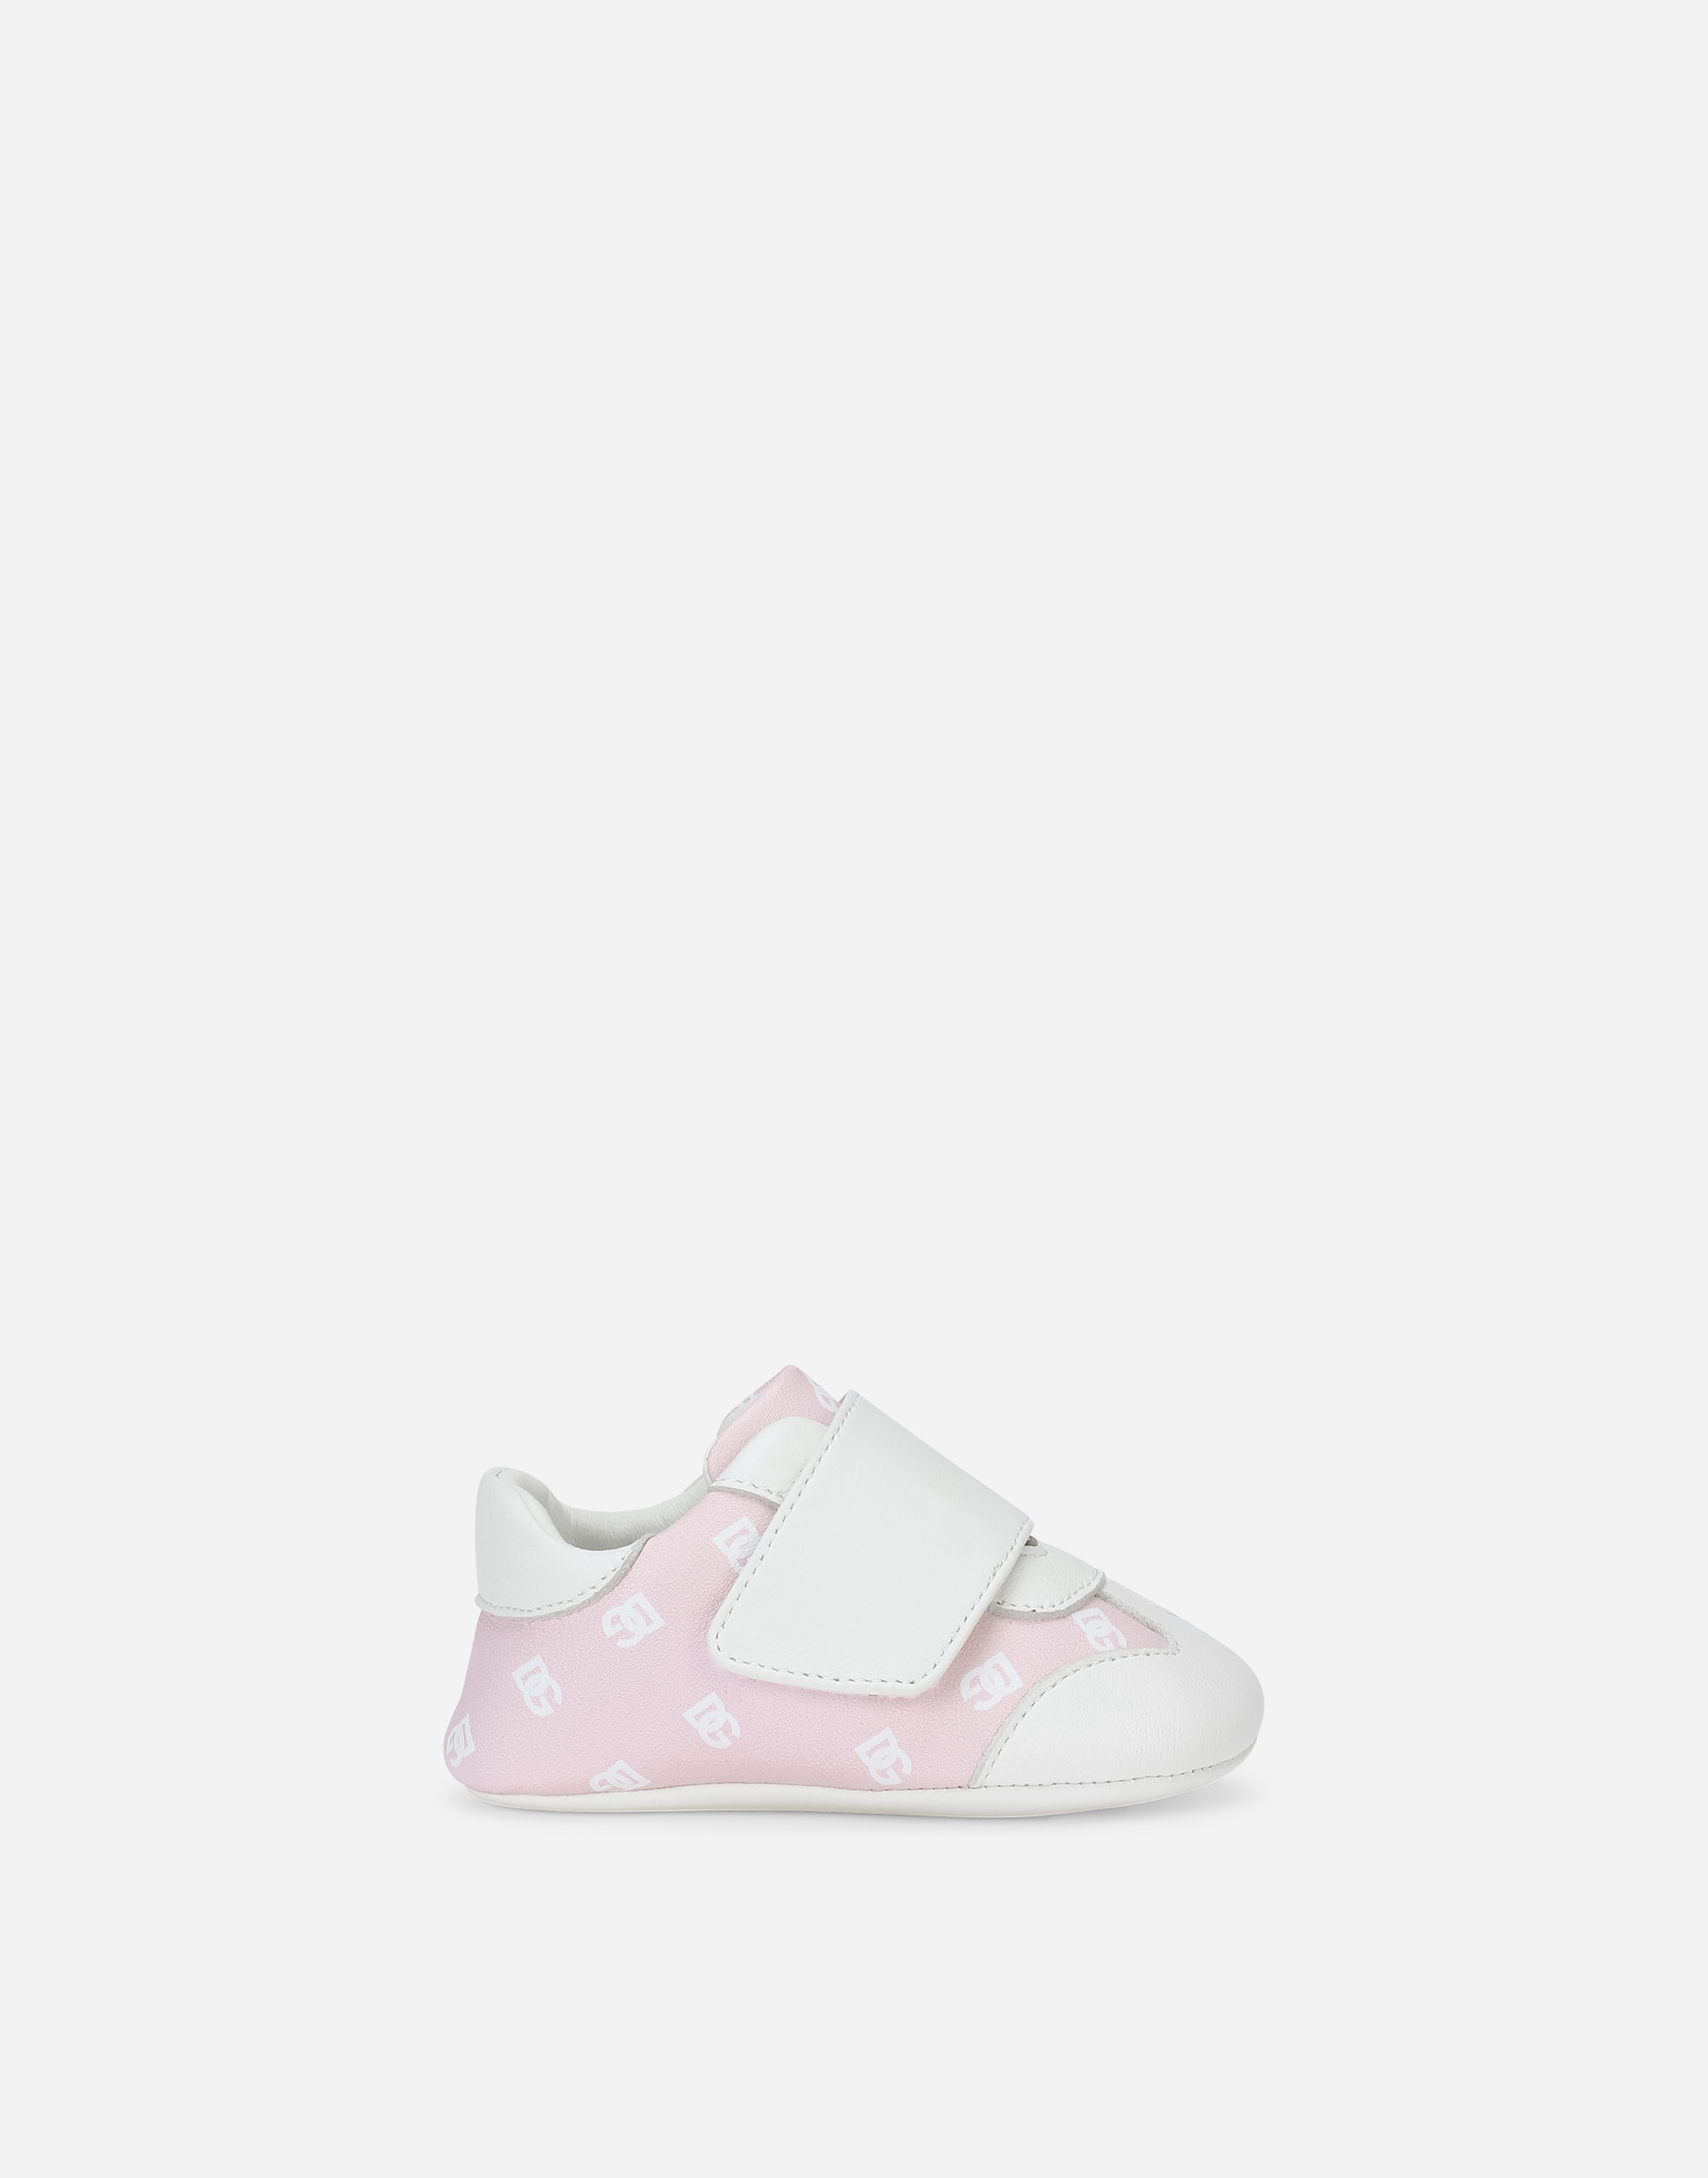 Dolce & Gabbana Babies' Nappa Leather Newborn Sneakers With Dg-logo Print In White